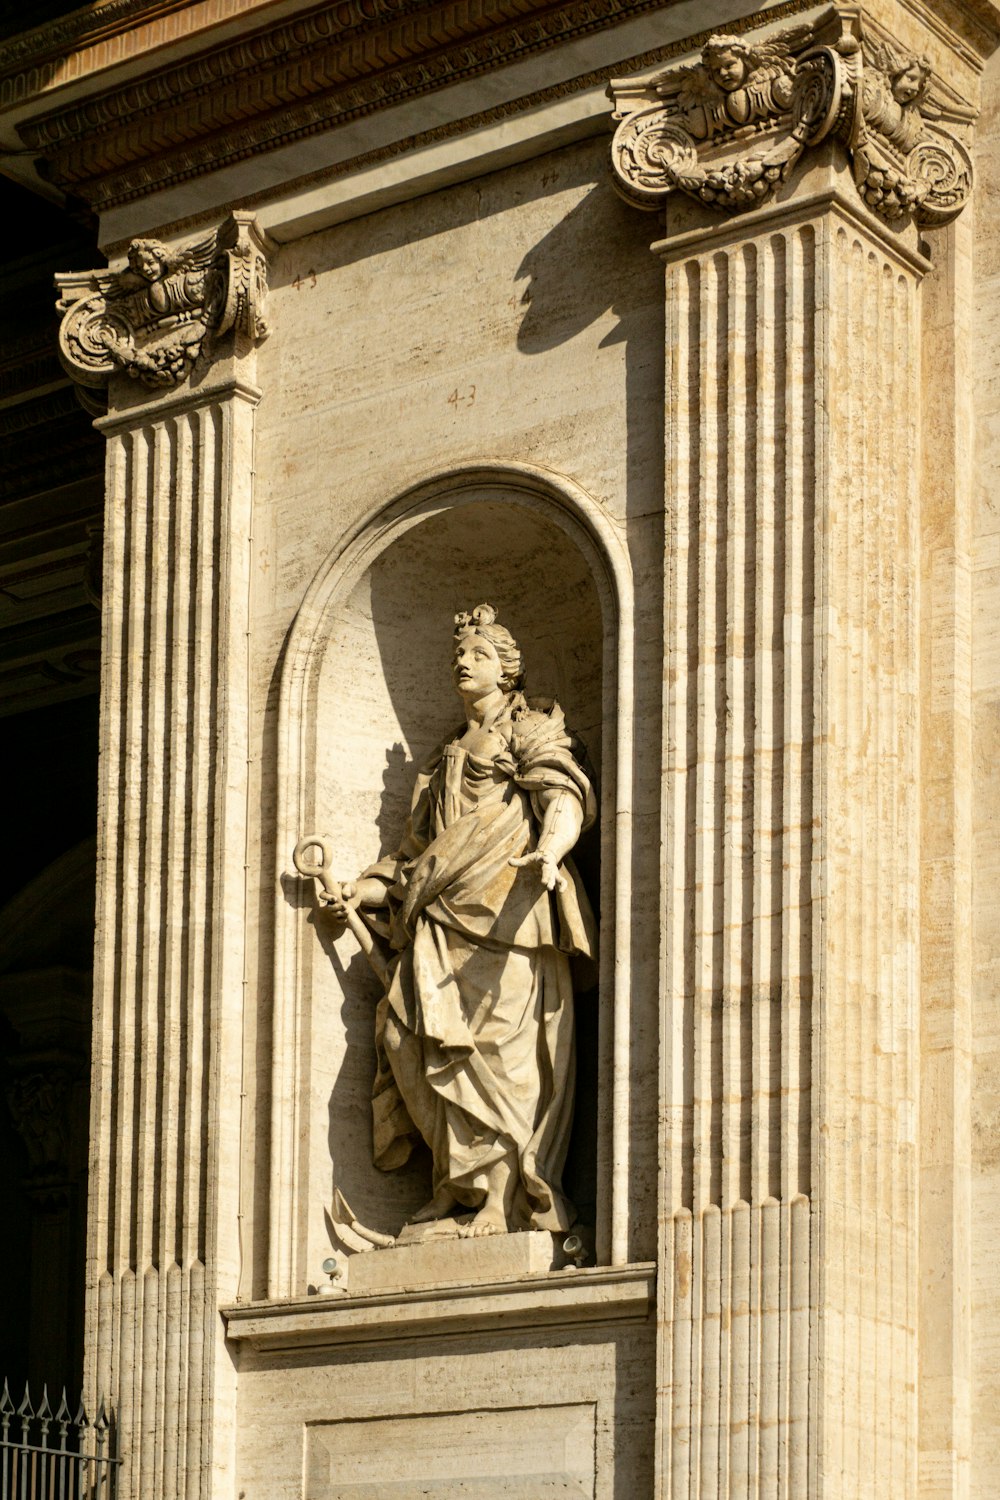 a statue of a woman holding a bird on top of a building